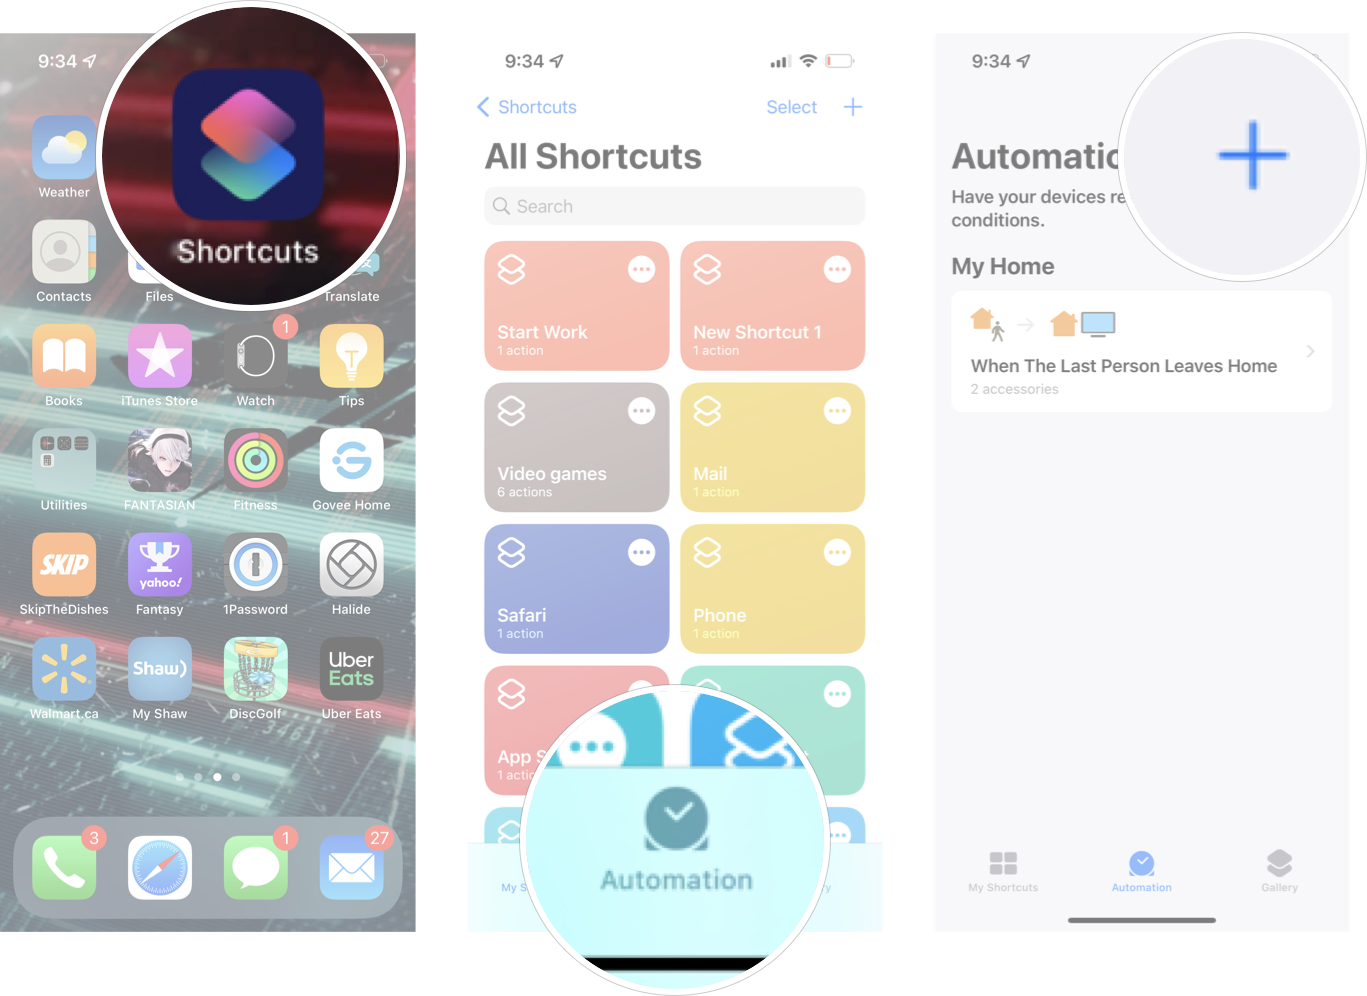 Create New Automation In Shortcuts in iOS: Launch Shortcuts from your home screen, tap Automation, and then tap the + symbol.